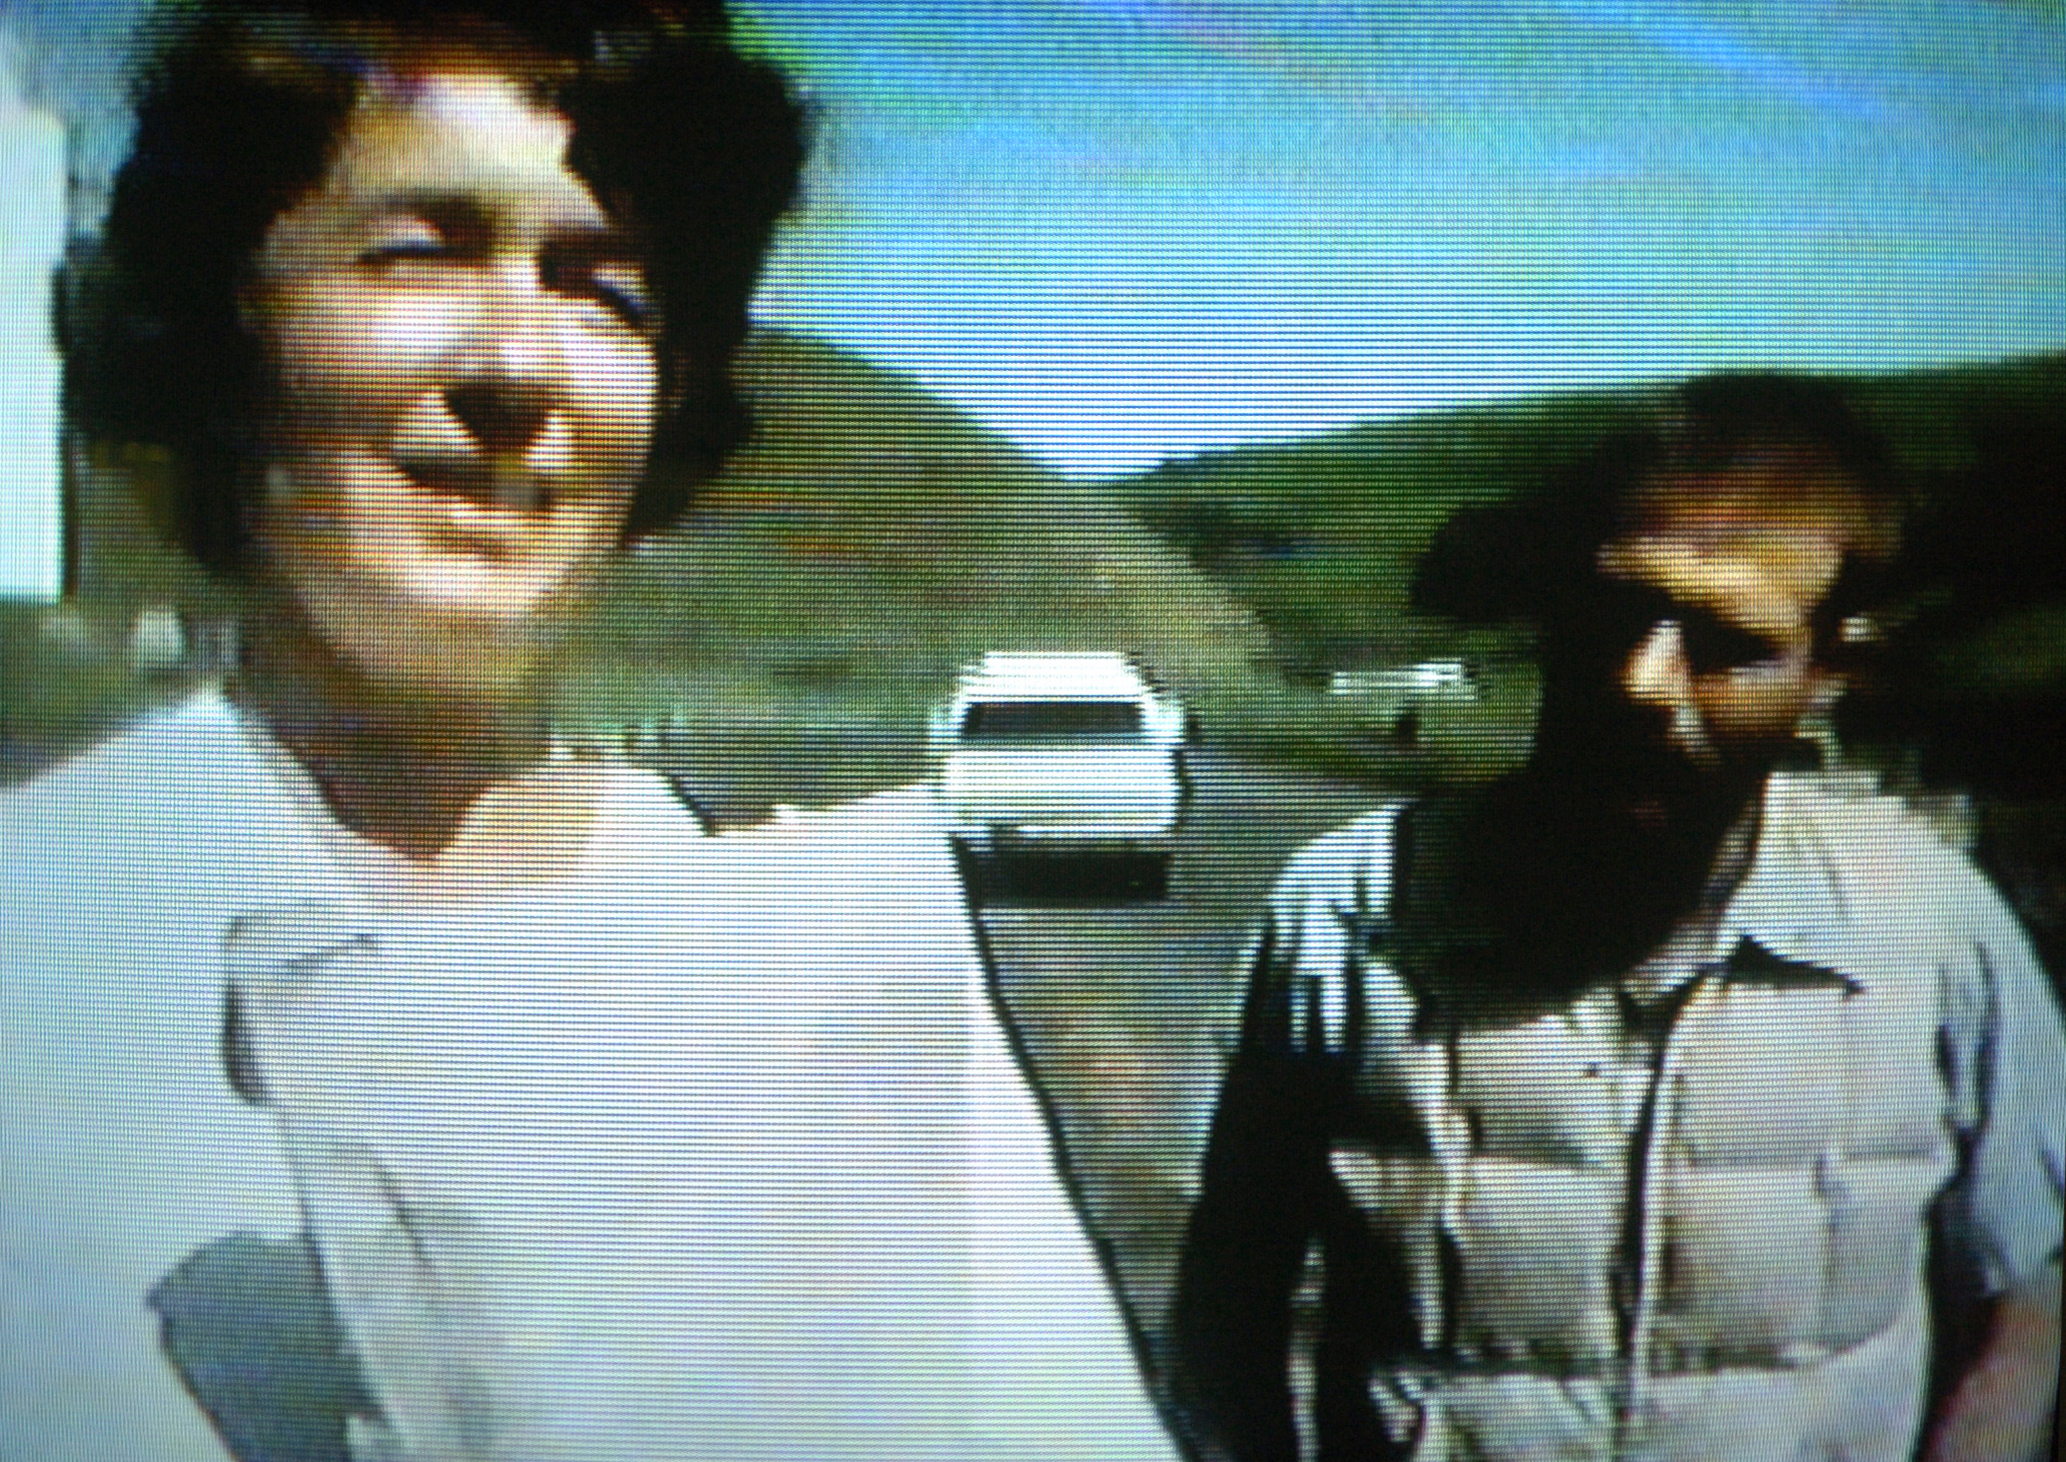 Former NBC investigative journalist Pat Lynch was undaunted by threats made against her in May 1978,while filming Synanon cult's property from a deserted public road in Marshall, California. She and her crew were confronted by armed men and women who held the journalists captive at gunpoint for three hours.